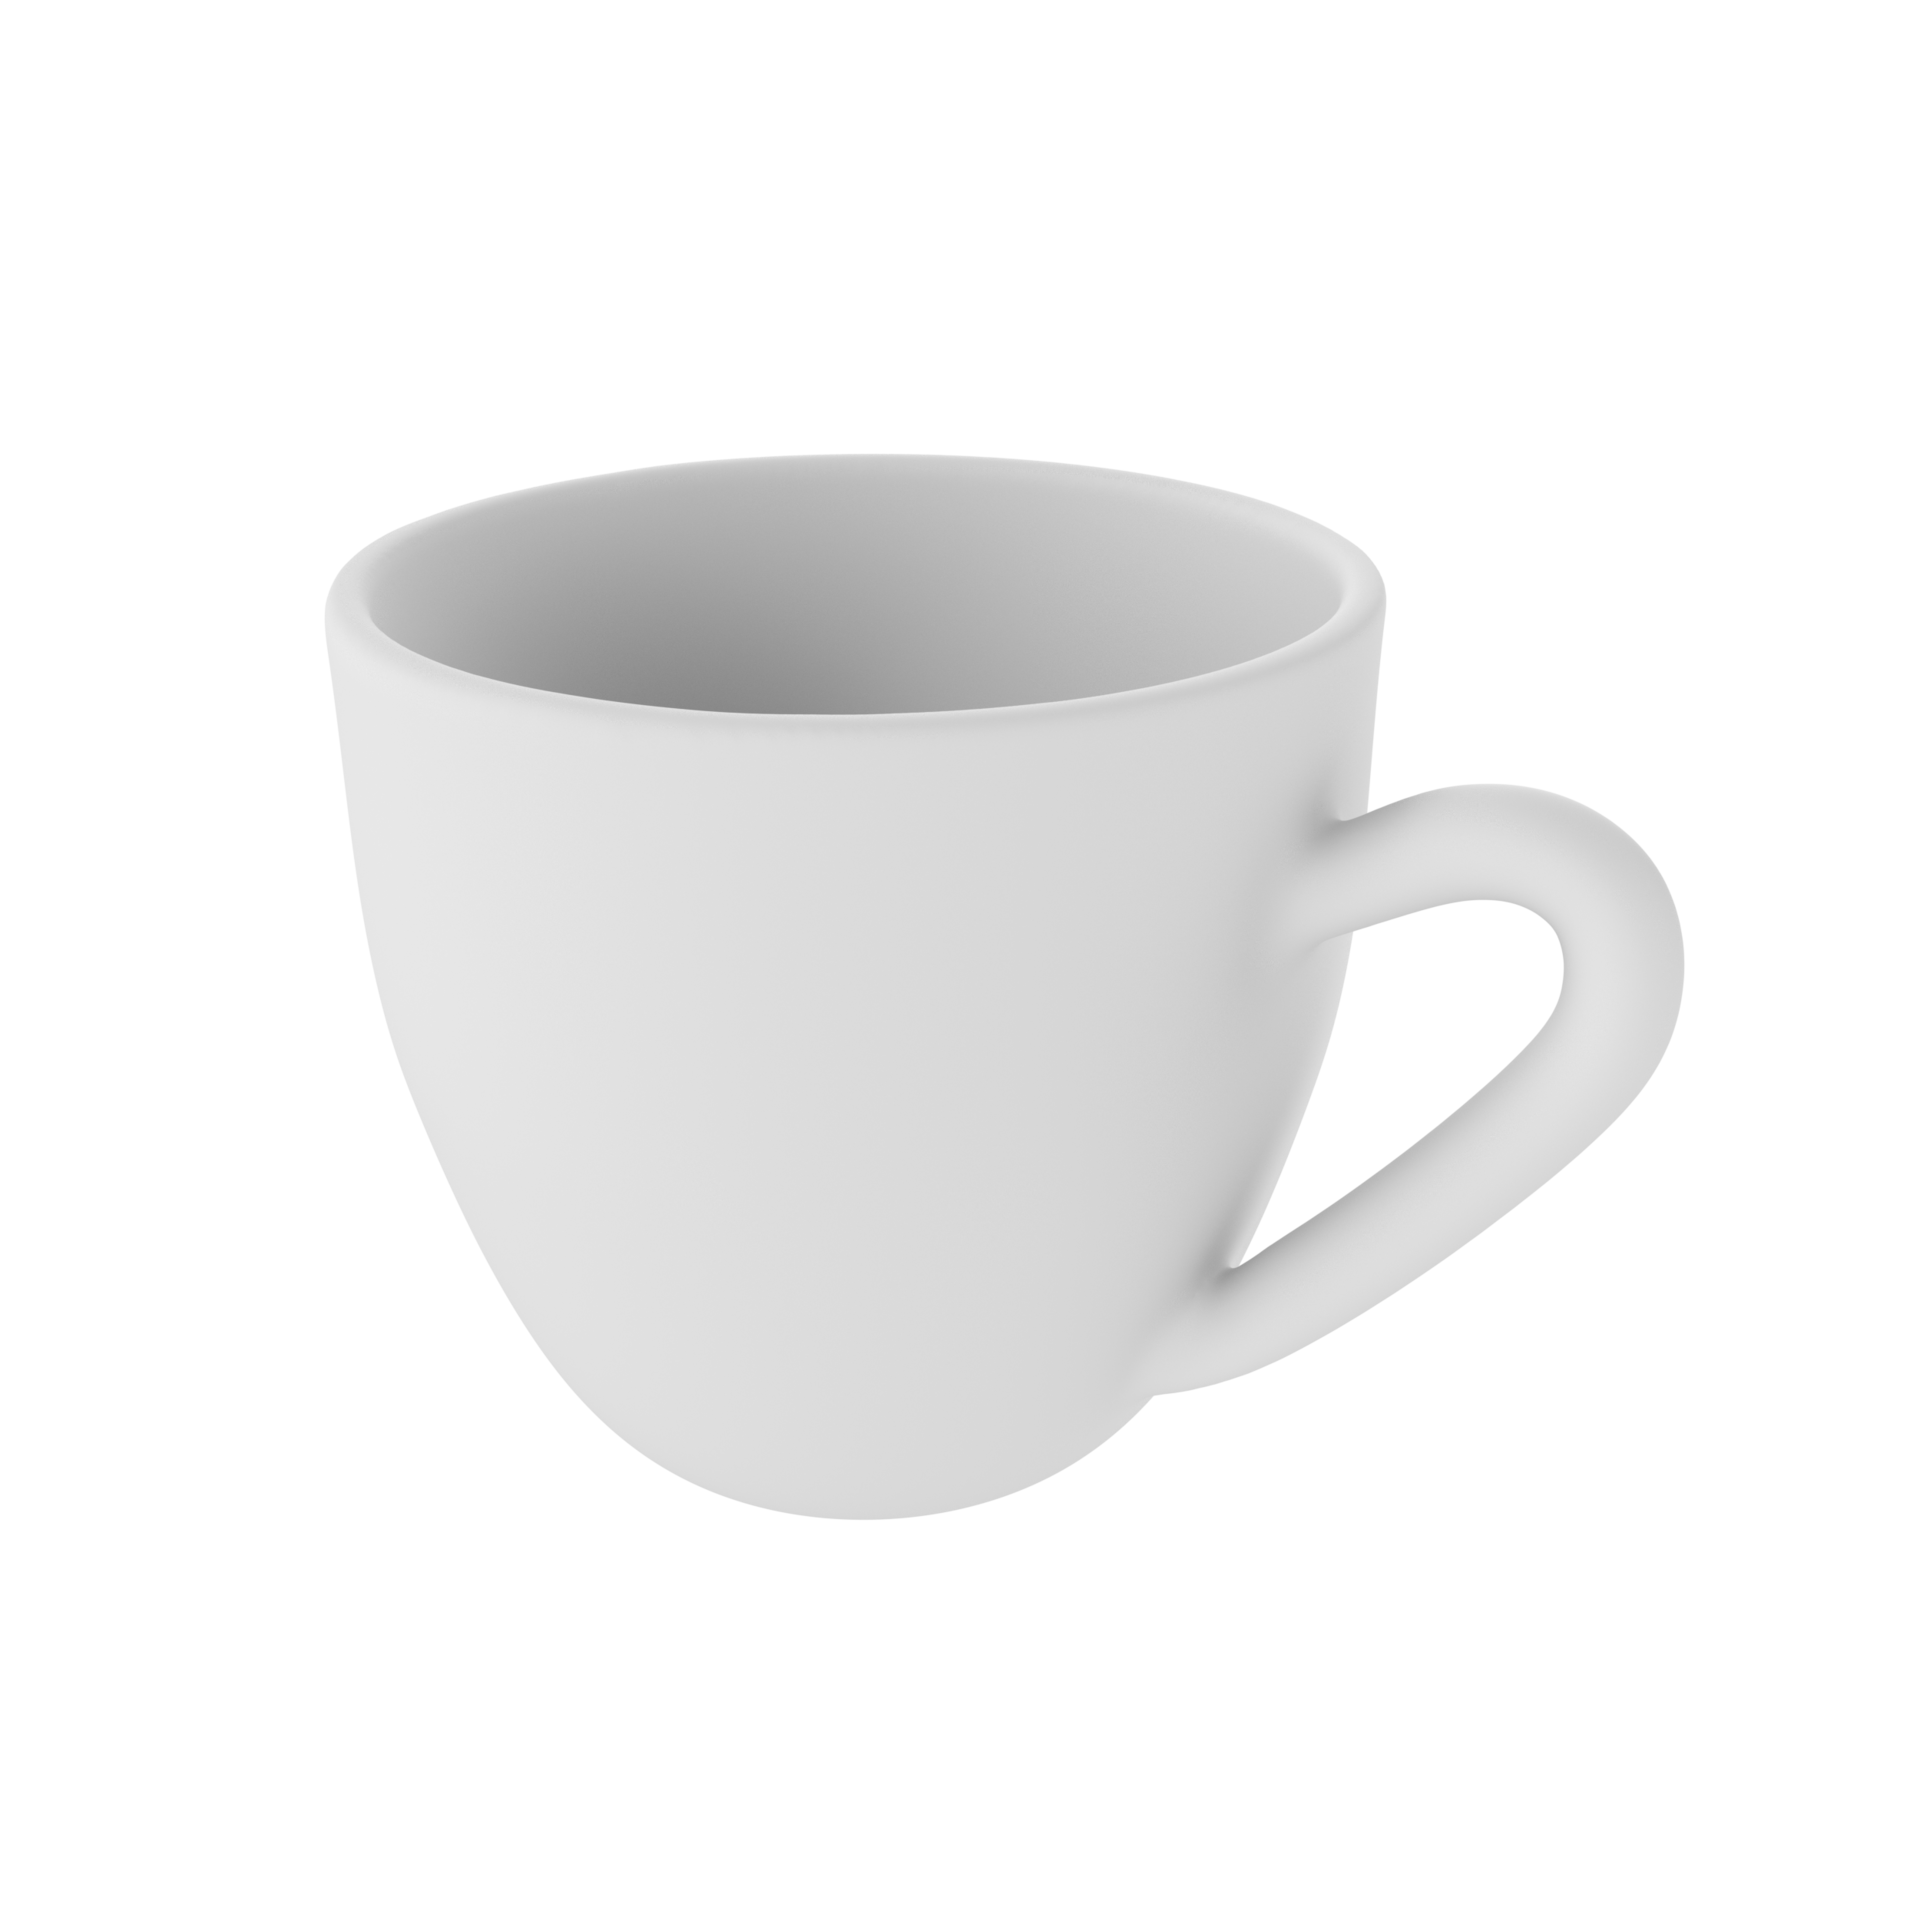 Shiny White Mug Icons PNG - Free PNG and Icons Downloads